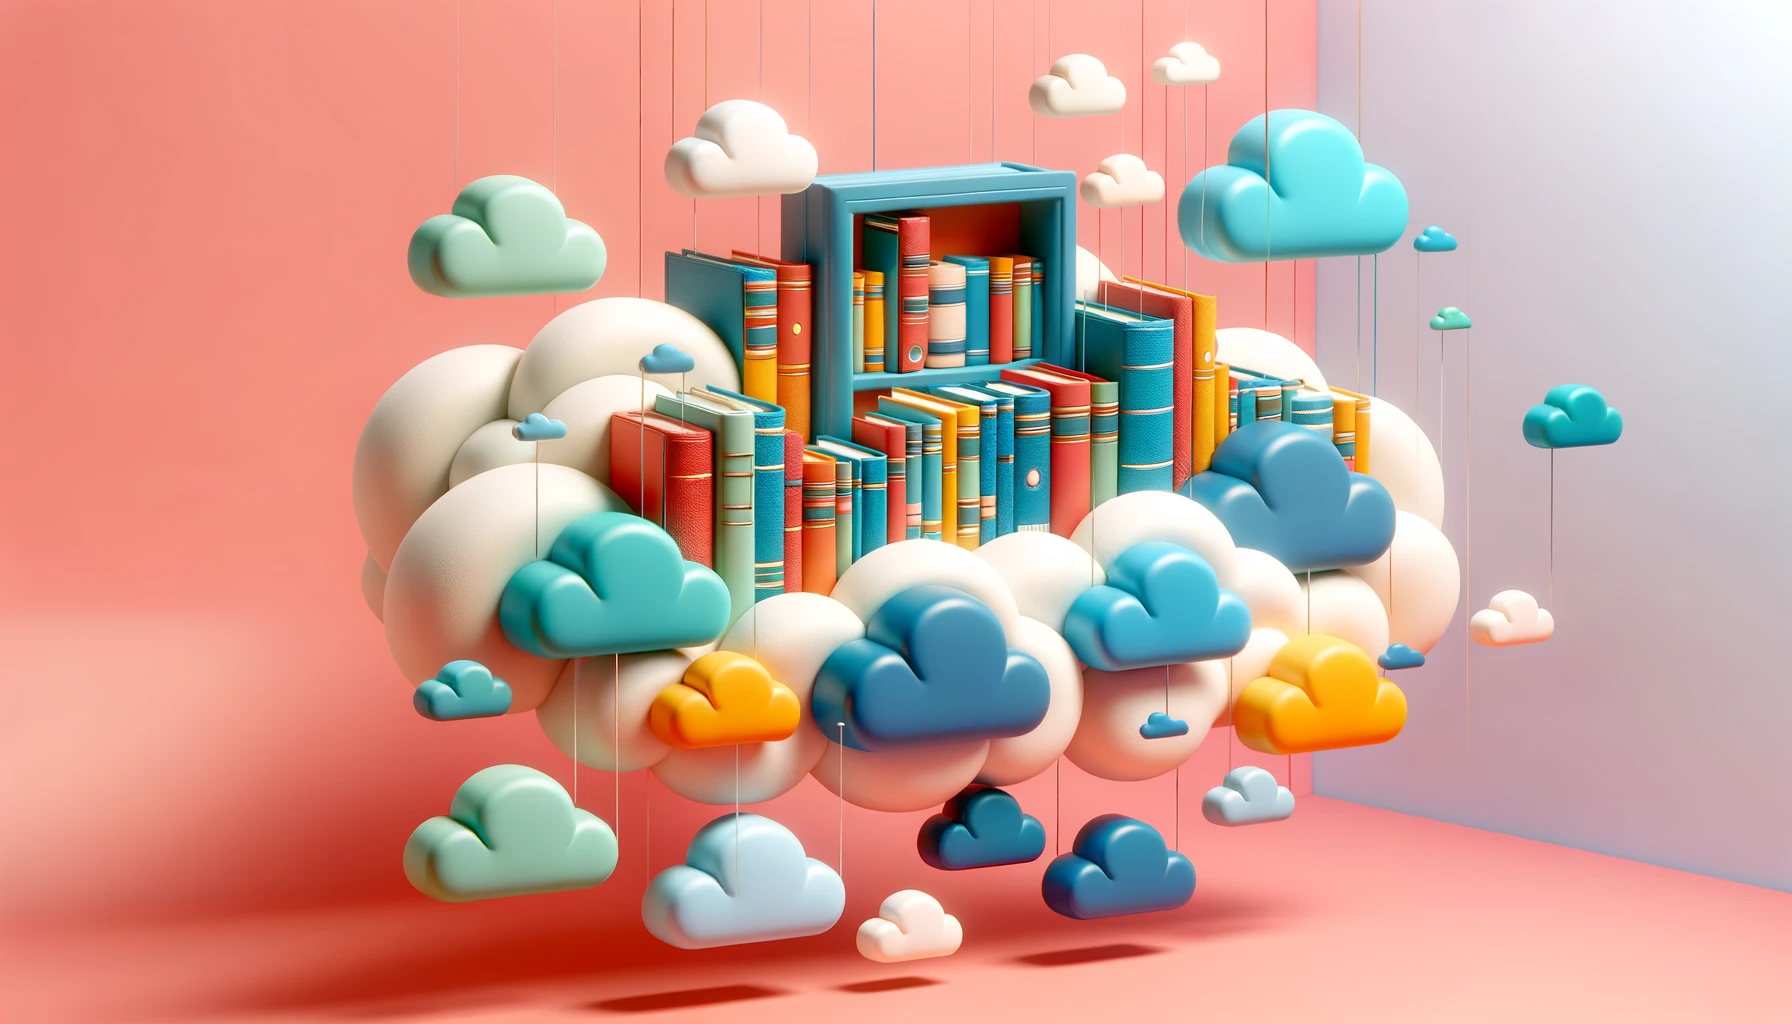 A dreamy depiction of a library floating in a sea of clouds